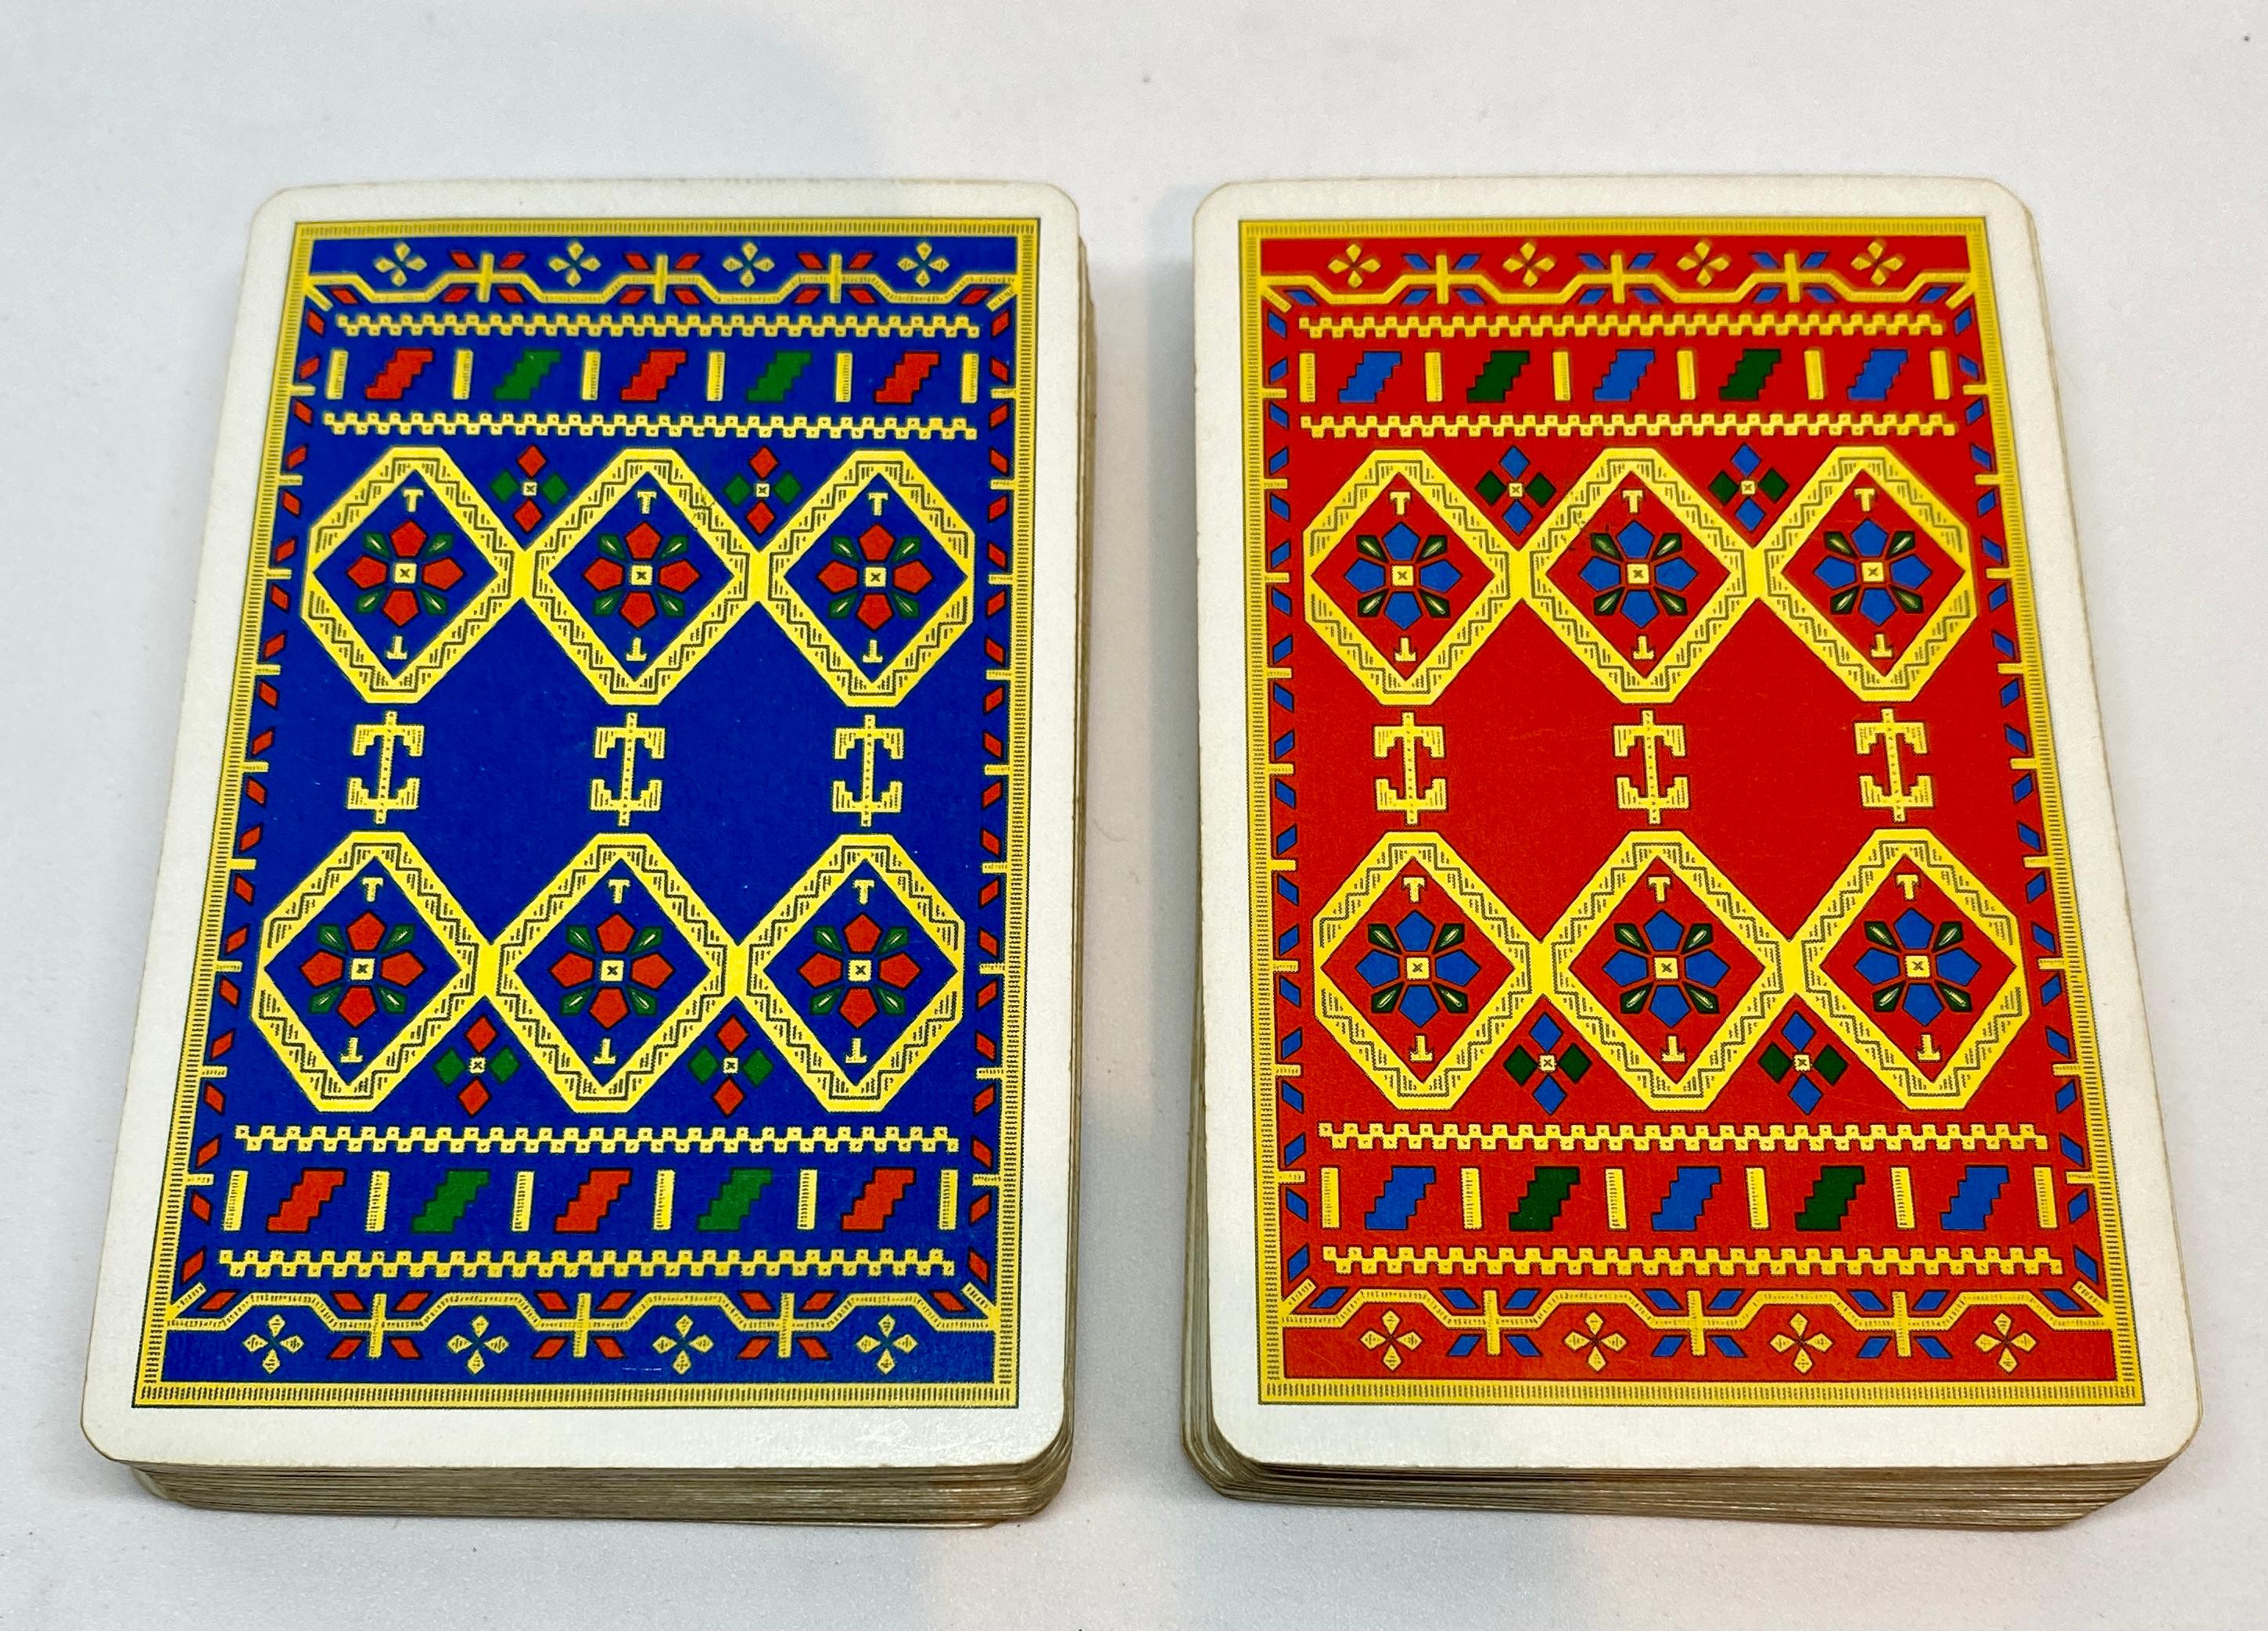 Two complete sets of vintage playing cards in a fitted green leather case signed Hermès Paris.

The playing cards feature gilt edges and are in excellent vintage condition. The Ace of Clubs in both decks features the Hermès logo and 